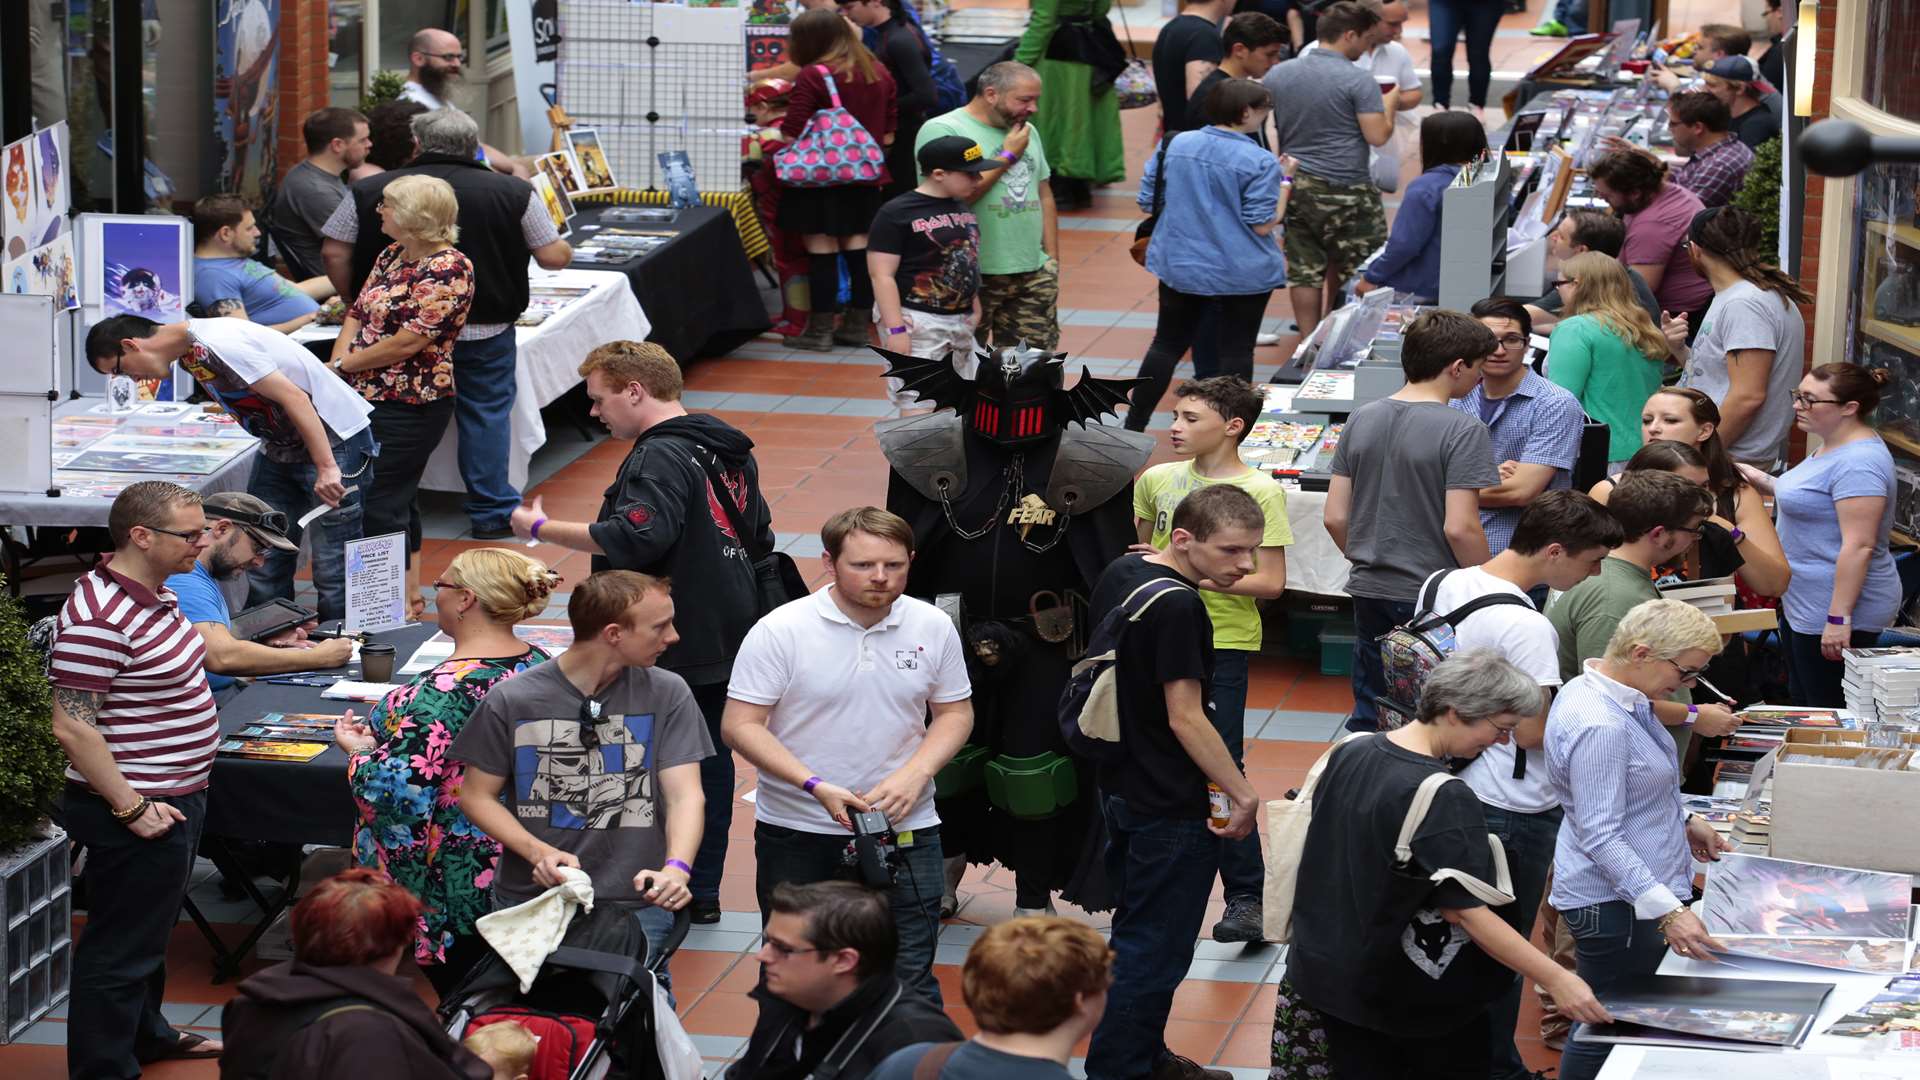 Demoncon is held twice a year in Maidstone's Royal Star Arcade